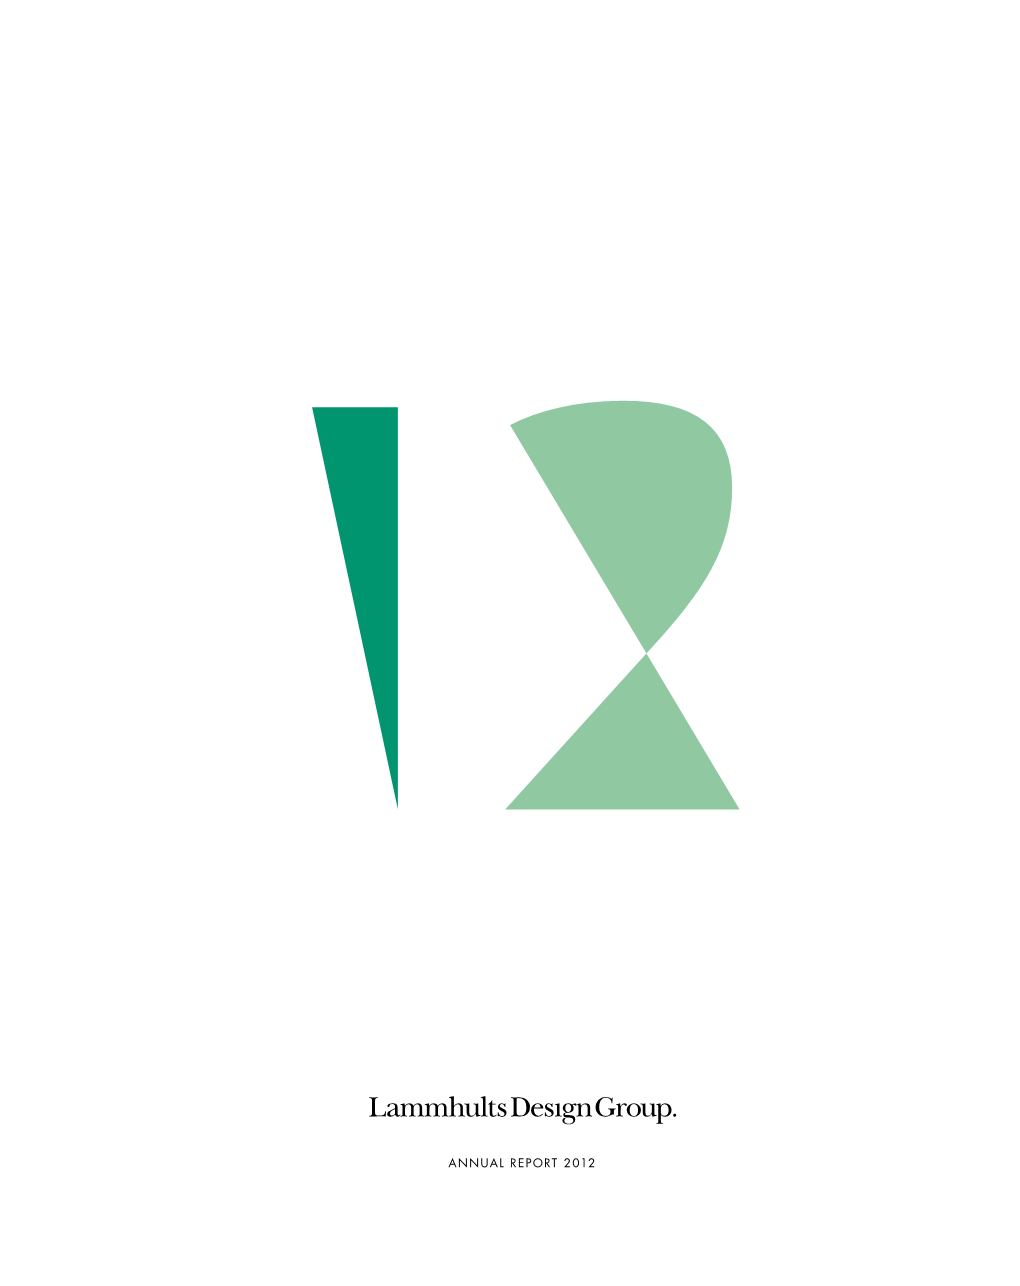 Annual Report 2012 Lammhults Design Group in Brief